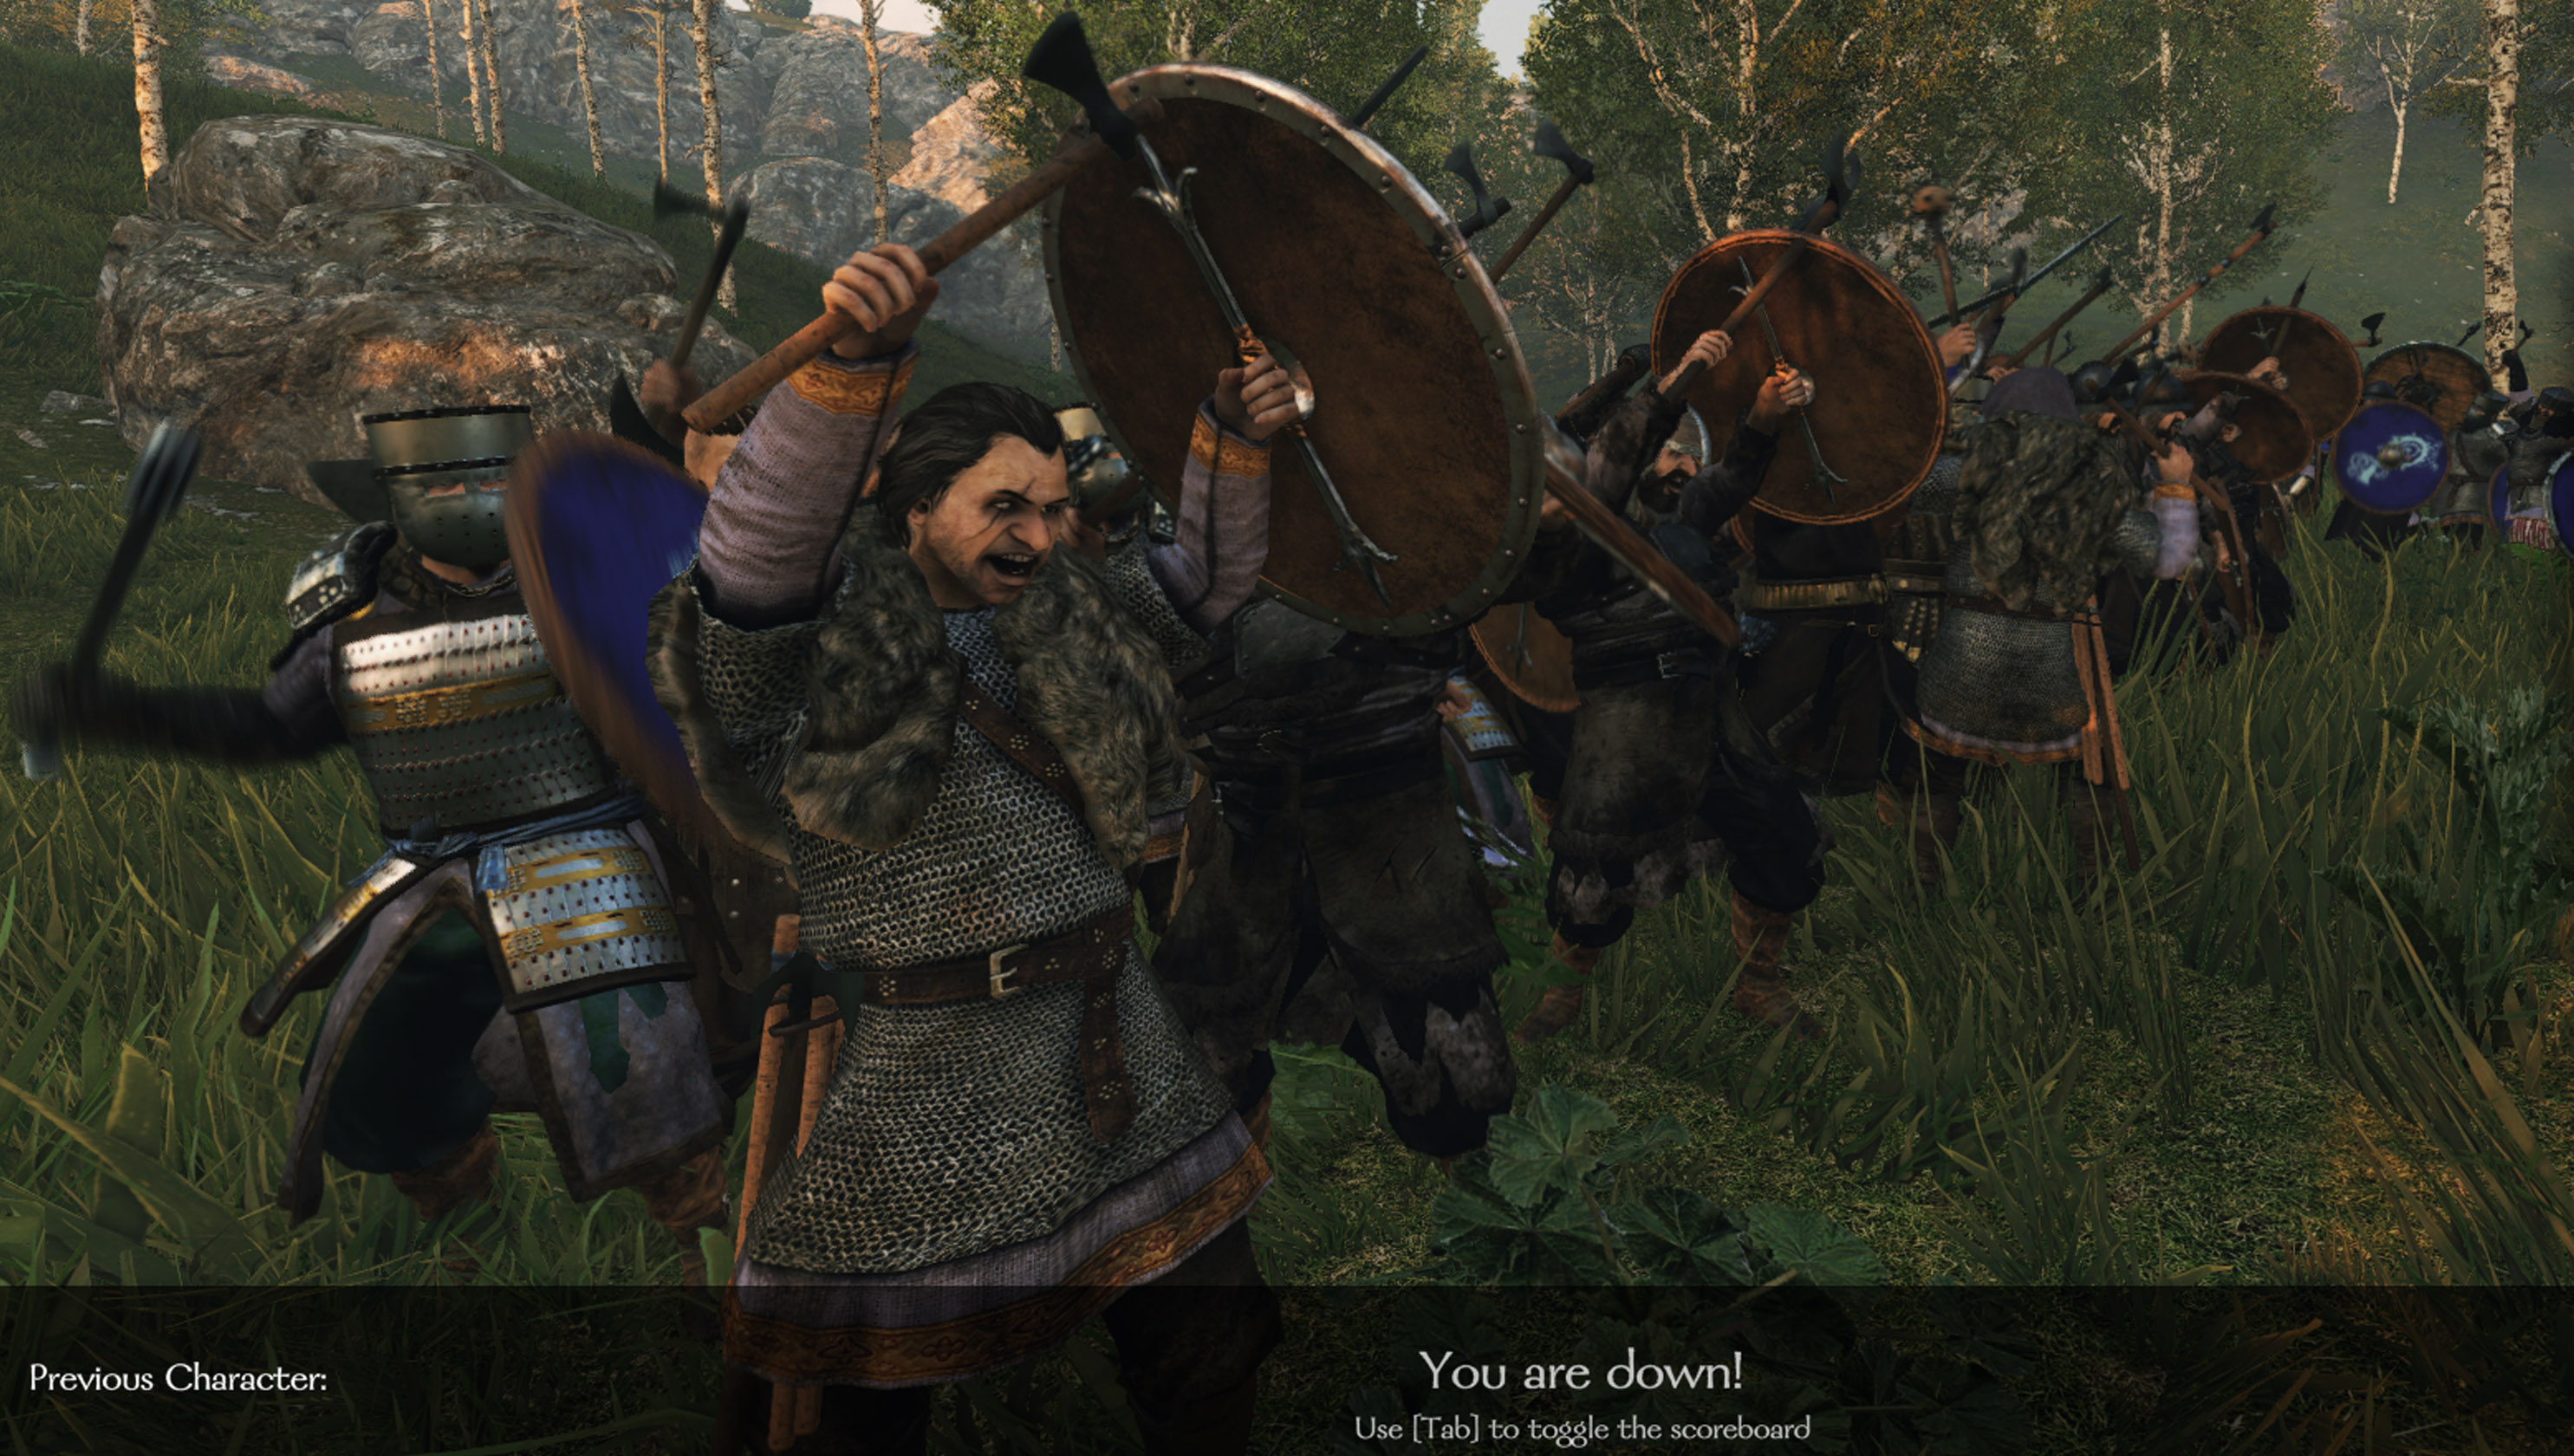 Image 13 - Hammerlord mod for Mount & Blade II: Bannerlord.